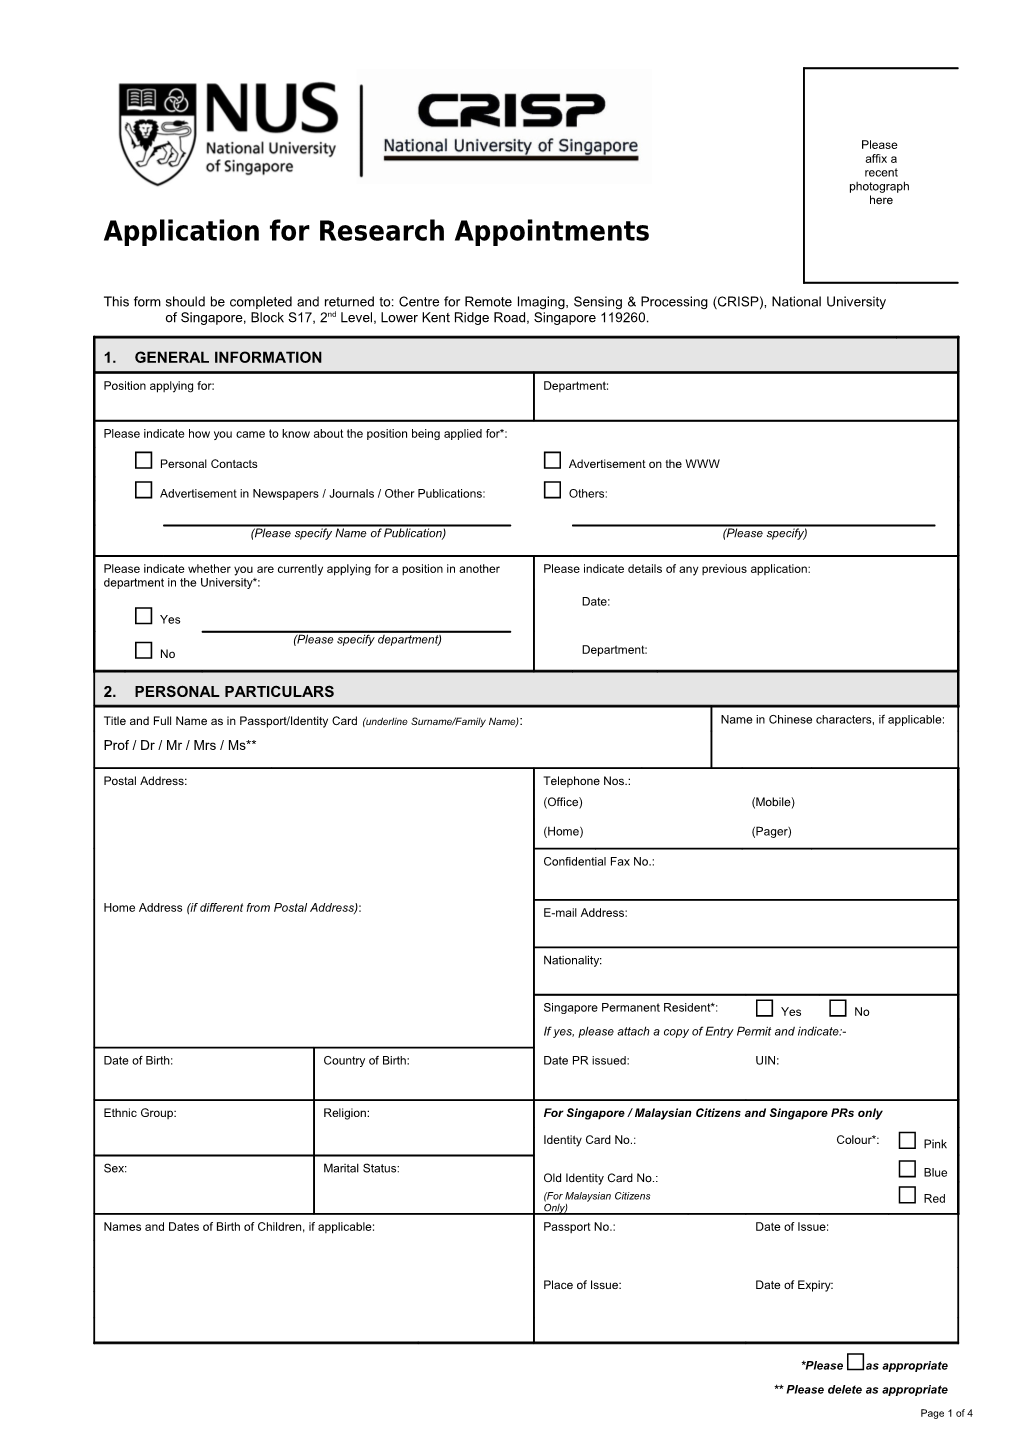 This Form Should Be Completed and Returned To: Centre for Remote Imaging, Sensing & Processing